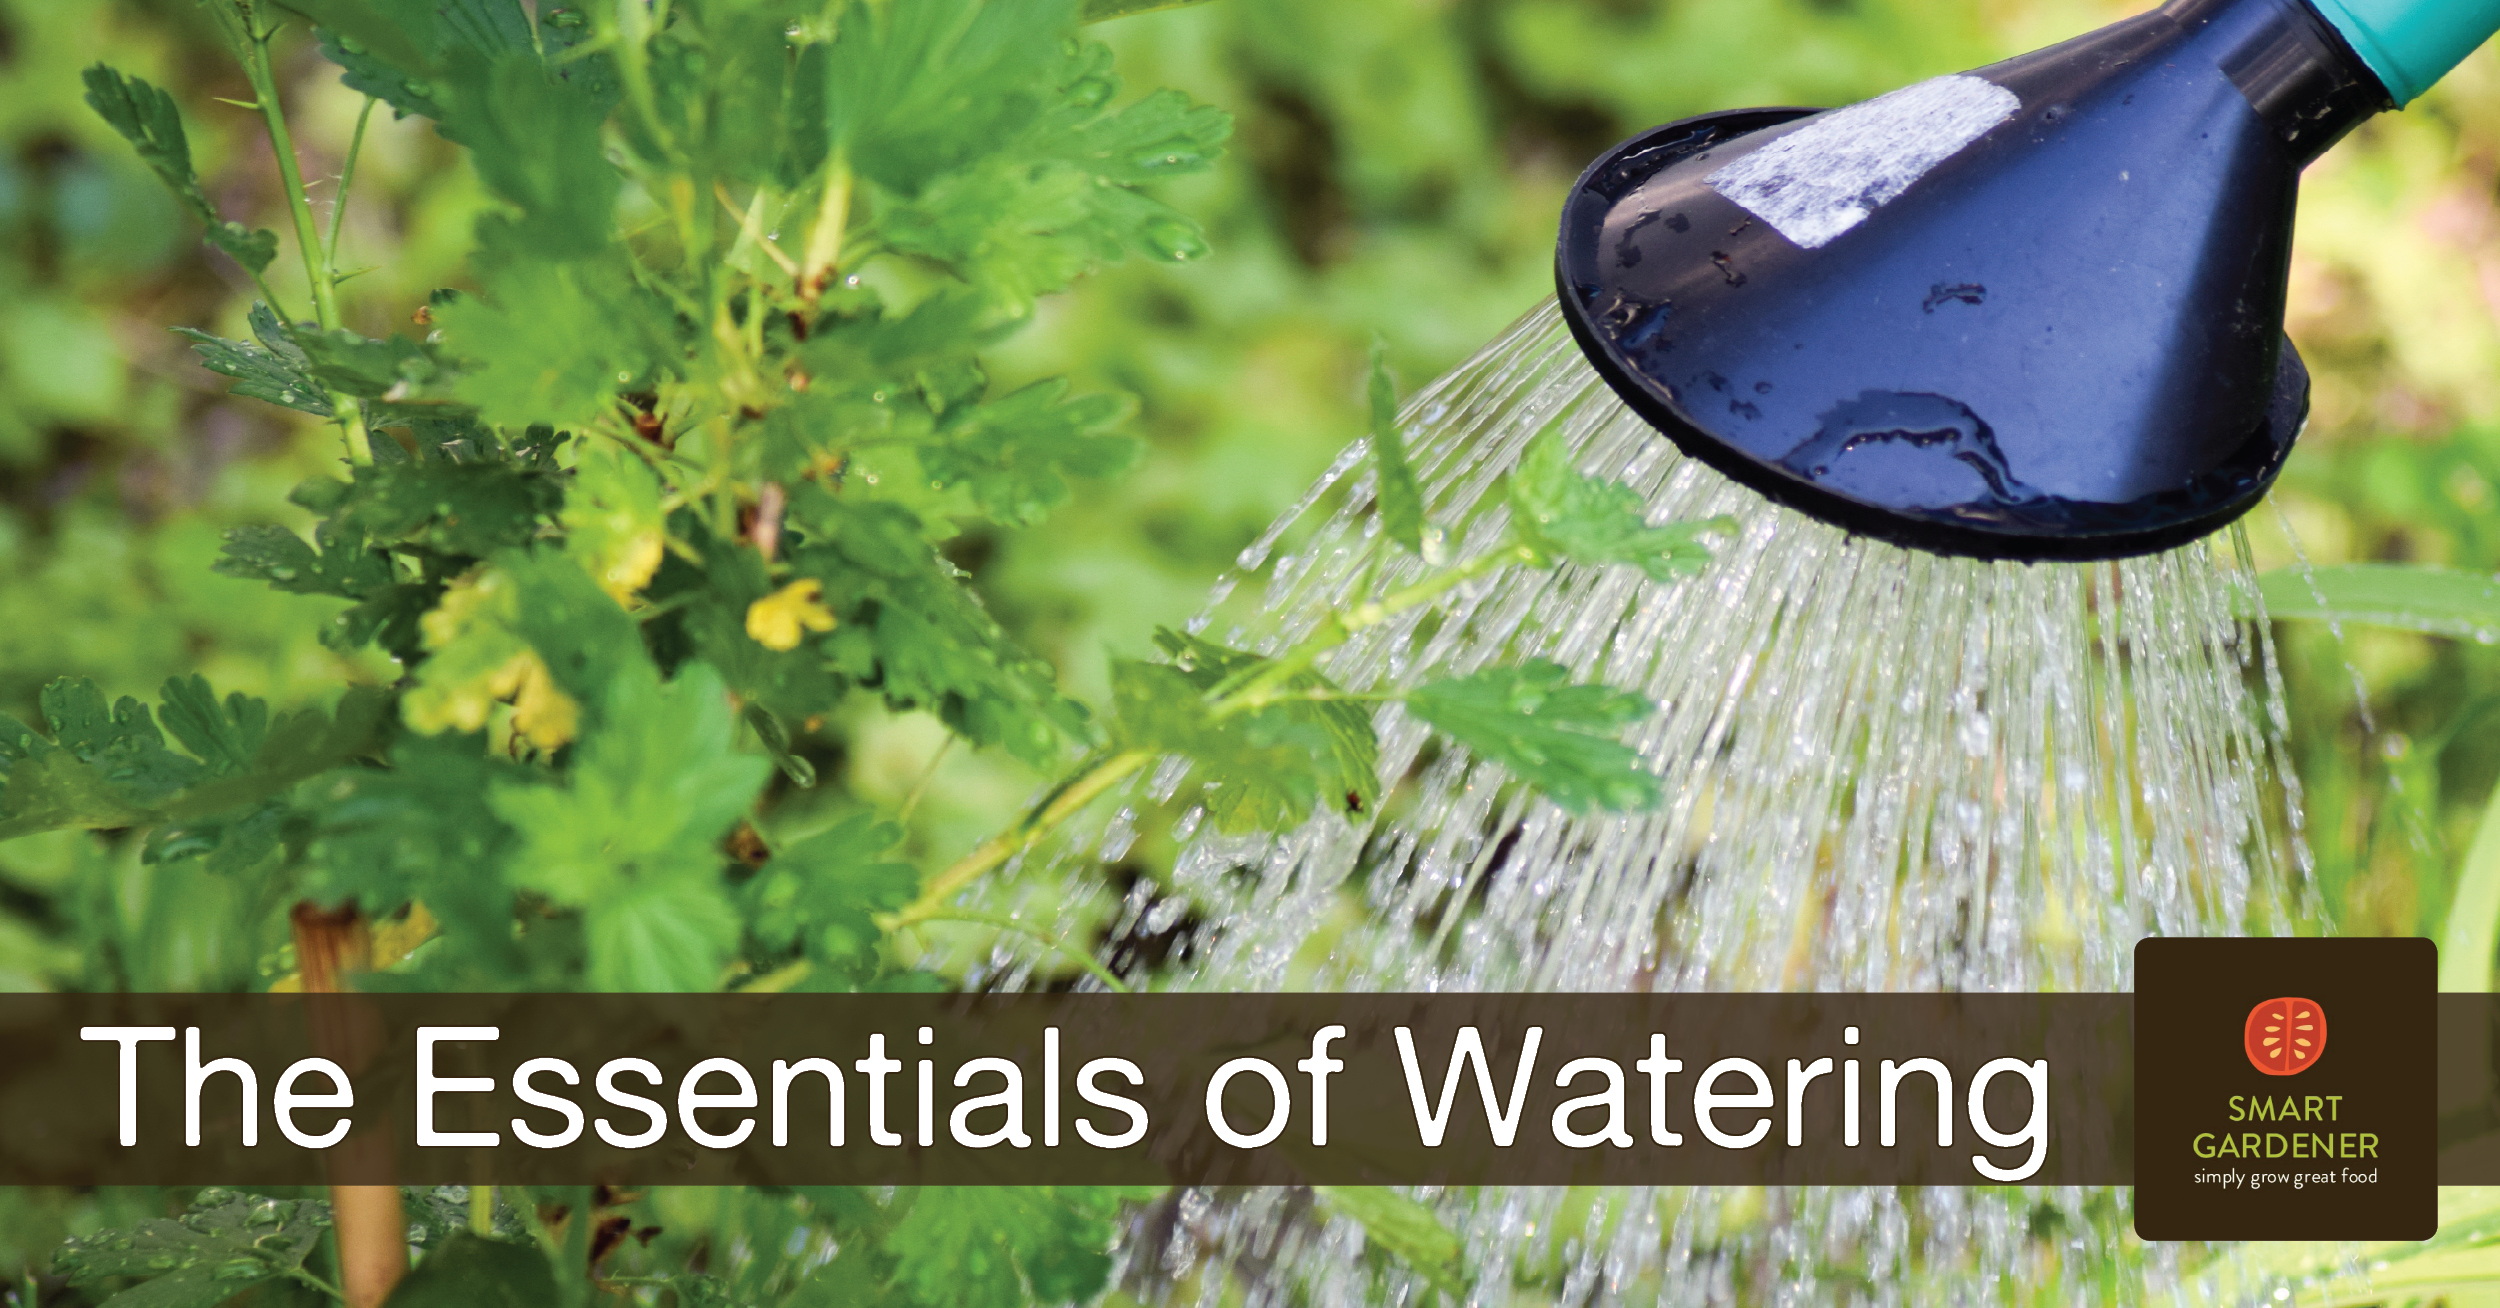 Image: a water can watering a green plant, with text "The Essentials of Watering" and the Smart Gardener logo across the bottom